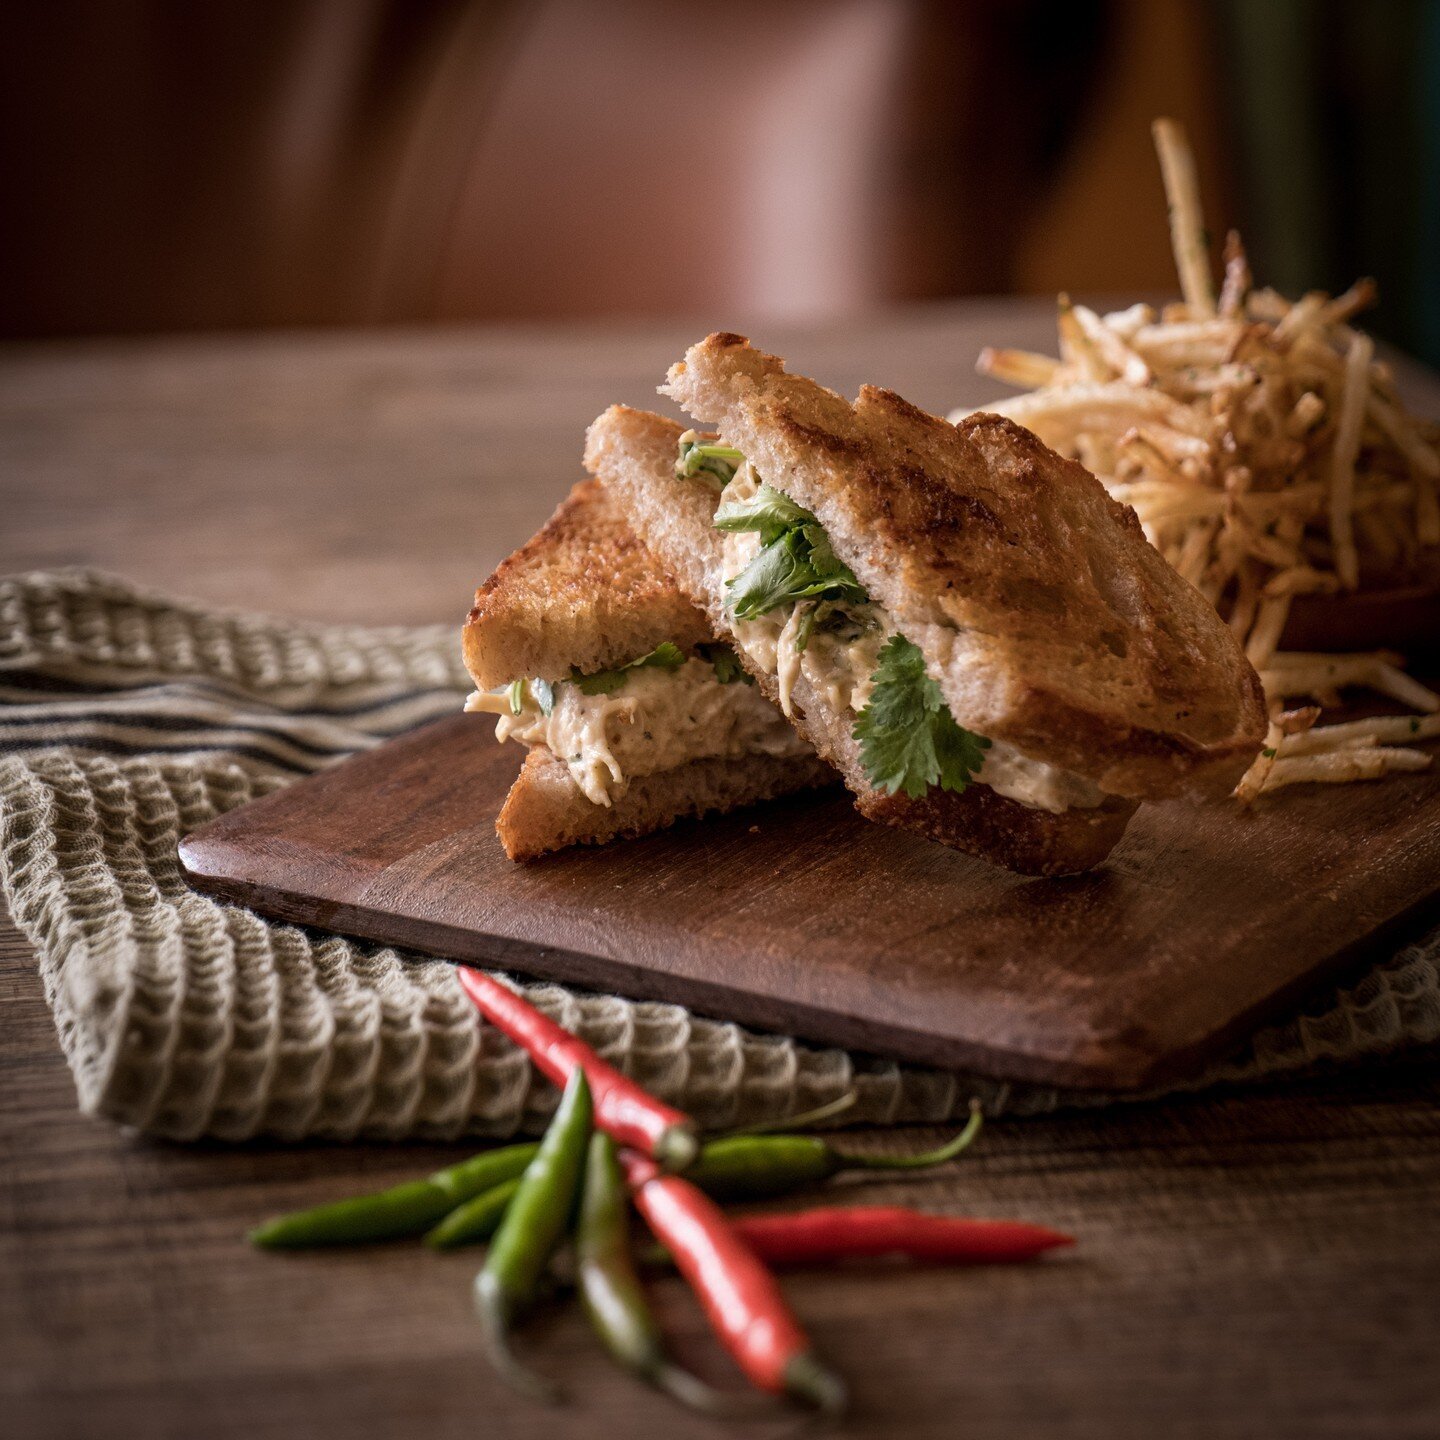 LONG WEEKEND LOVING

The best comfort food! Toasted sarmies. This is our chicken mayonnaise, chilli &amp; coriander toasted sandwich. See our full selection on our menu under each branch on the website (link in bio).

@gatewayumhlanga 
@galleriamall
